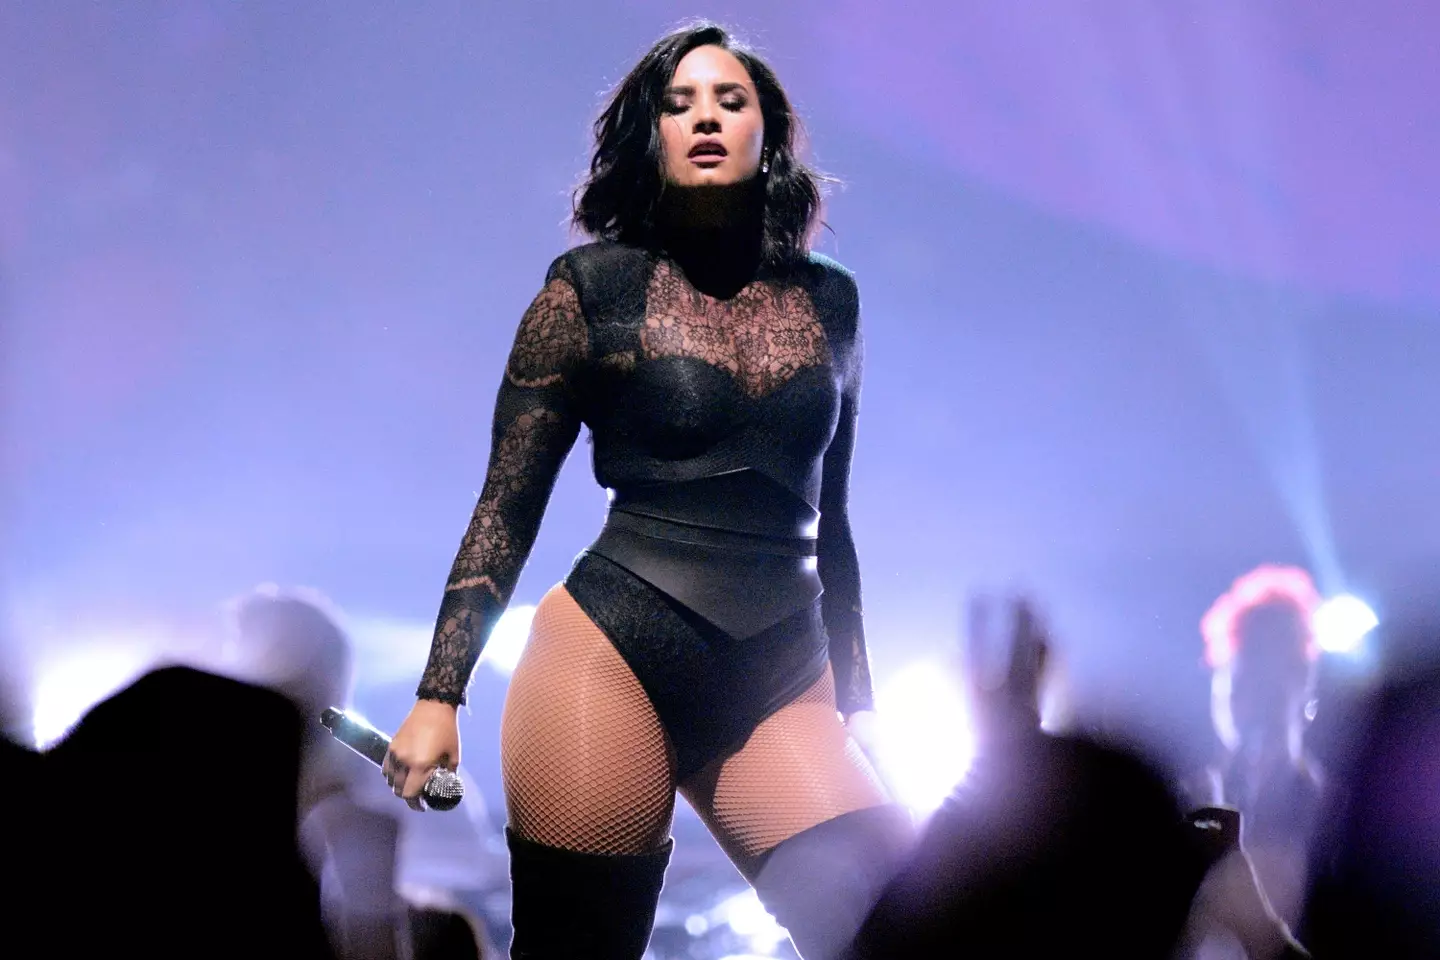 Lovato has long been open about her experience with an eating disorder.